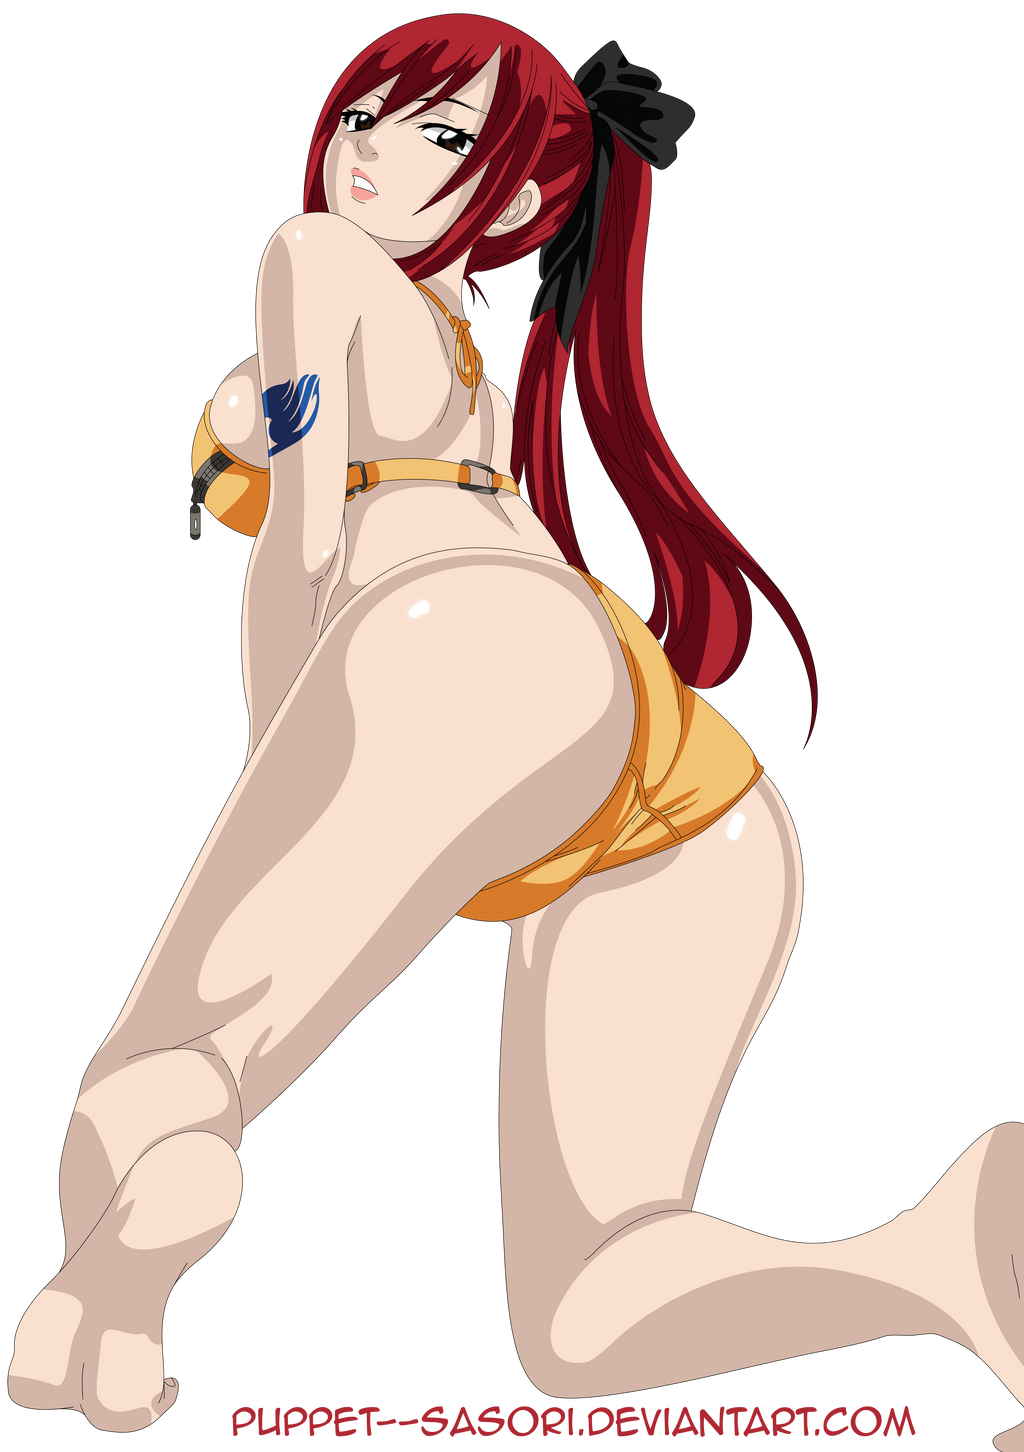 sexy_erza___over_100_watchers__by_puppet__sasori-d65070l.png